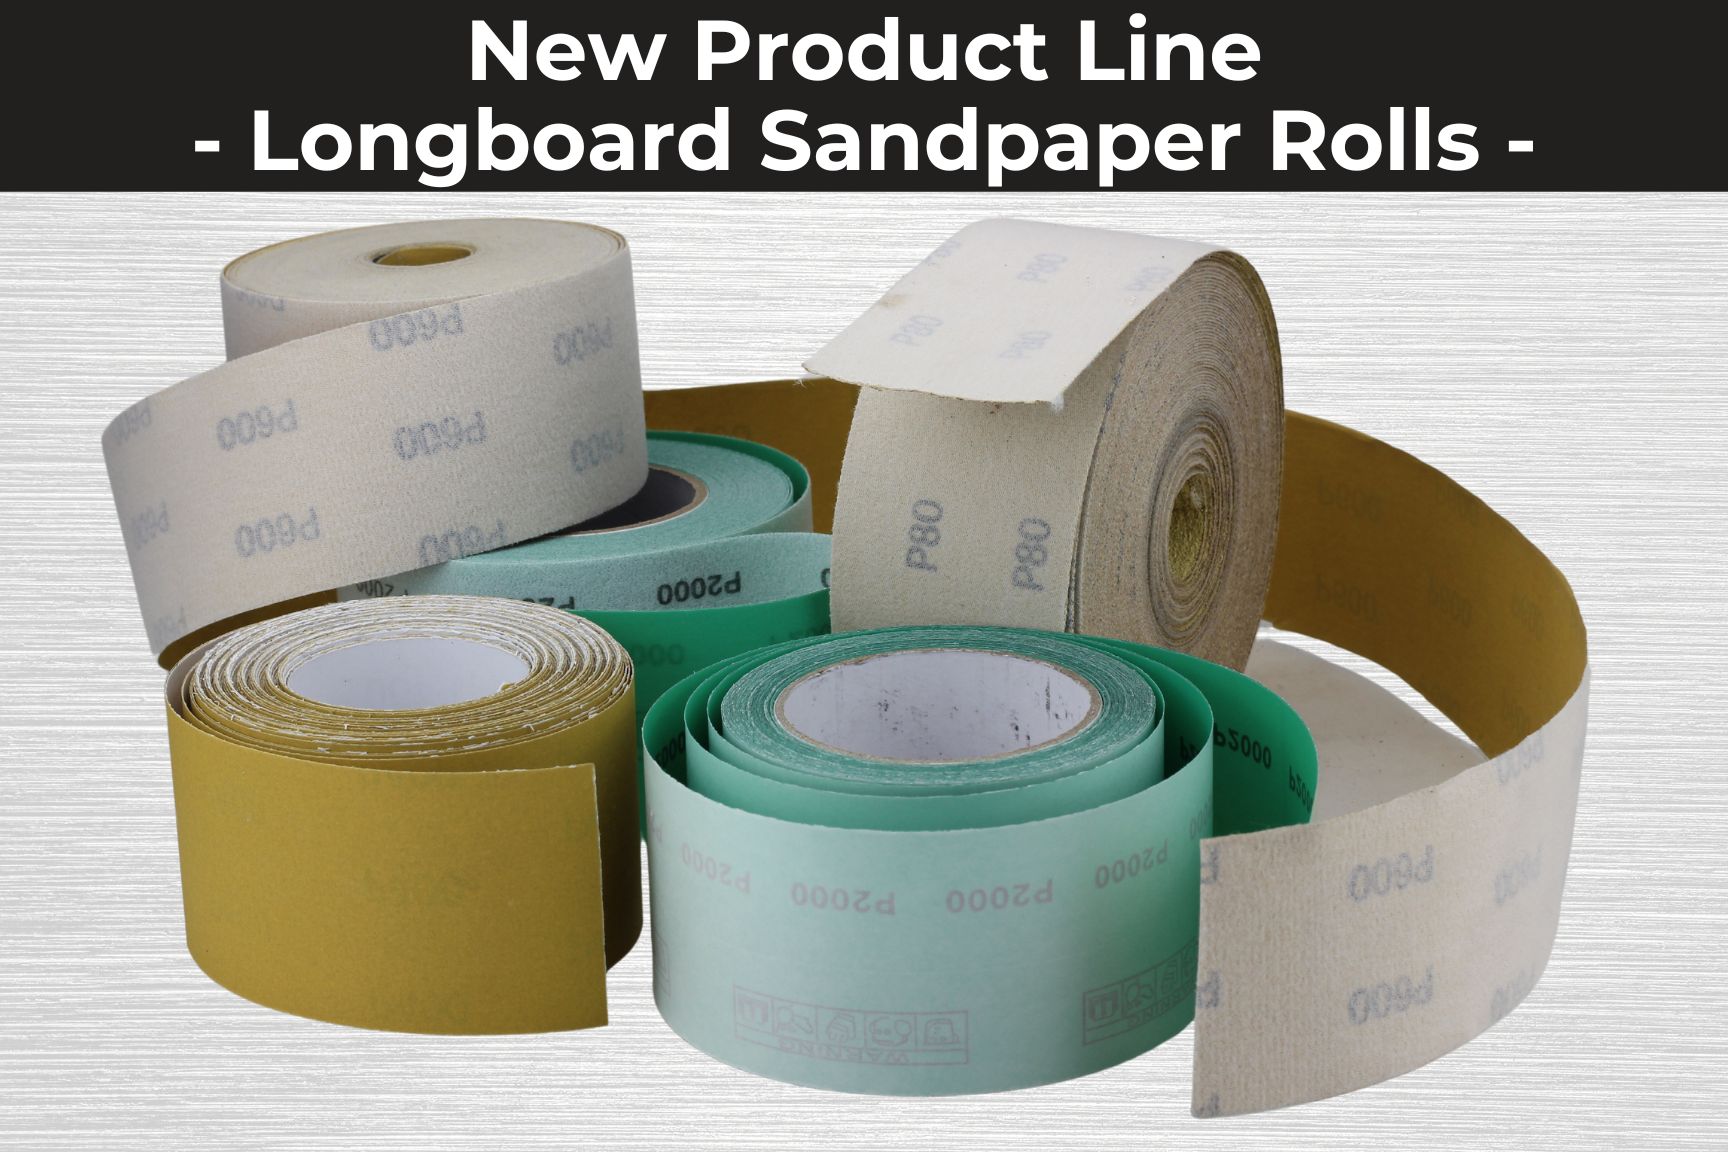 New product line announcement from Empire Abrasives - 2" continuous longboard sanding rolls